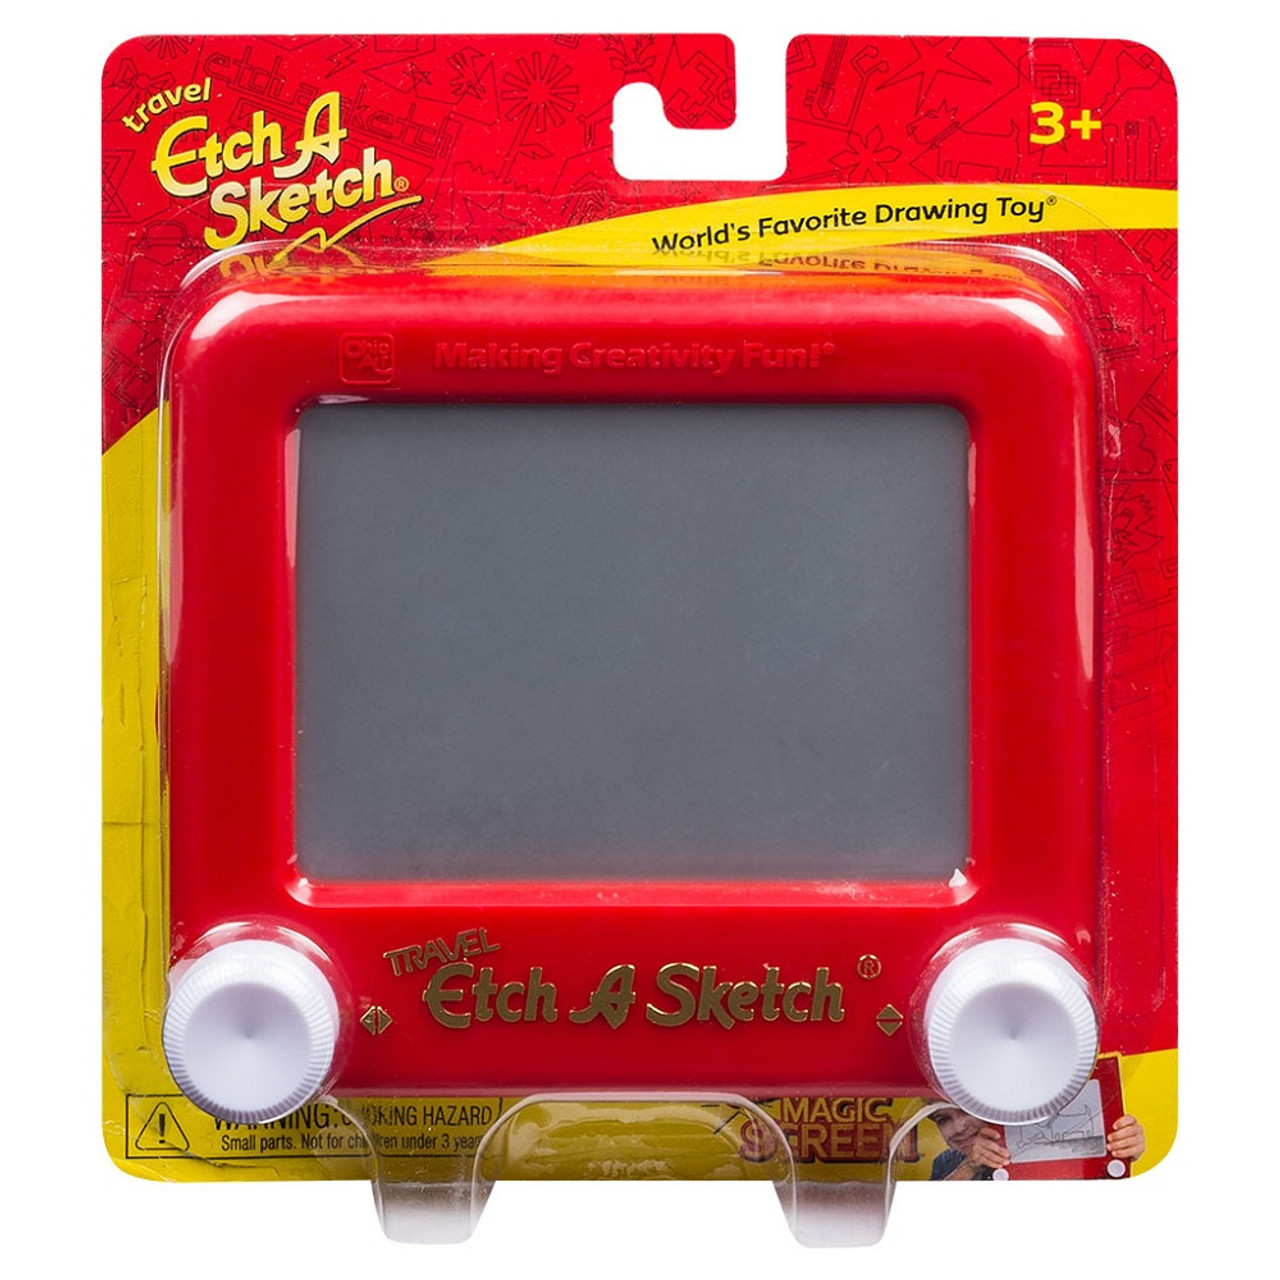 Etch A Sketch Animator 2000 by Ohio Art – The Video Game Kraken